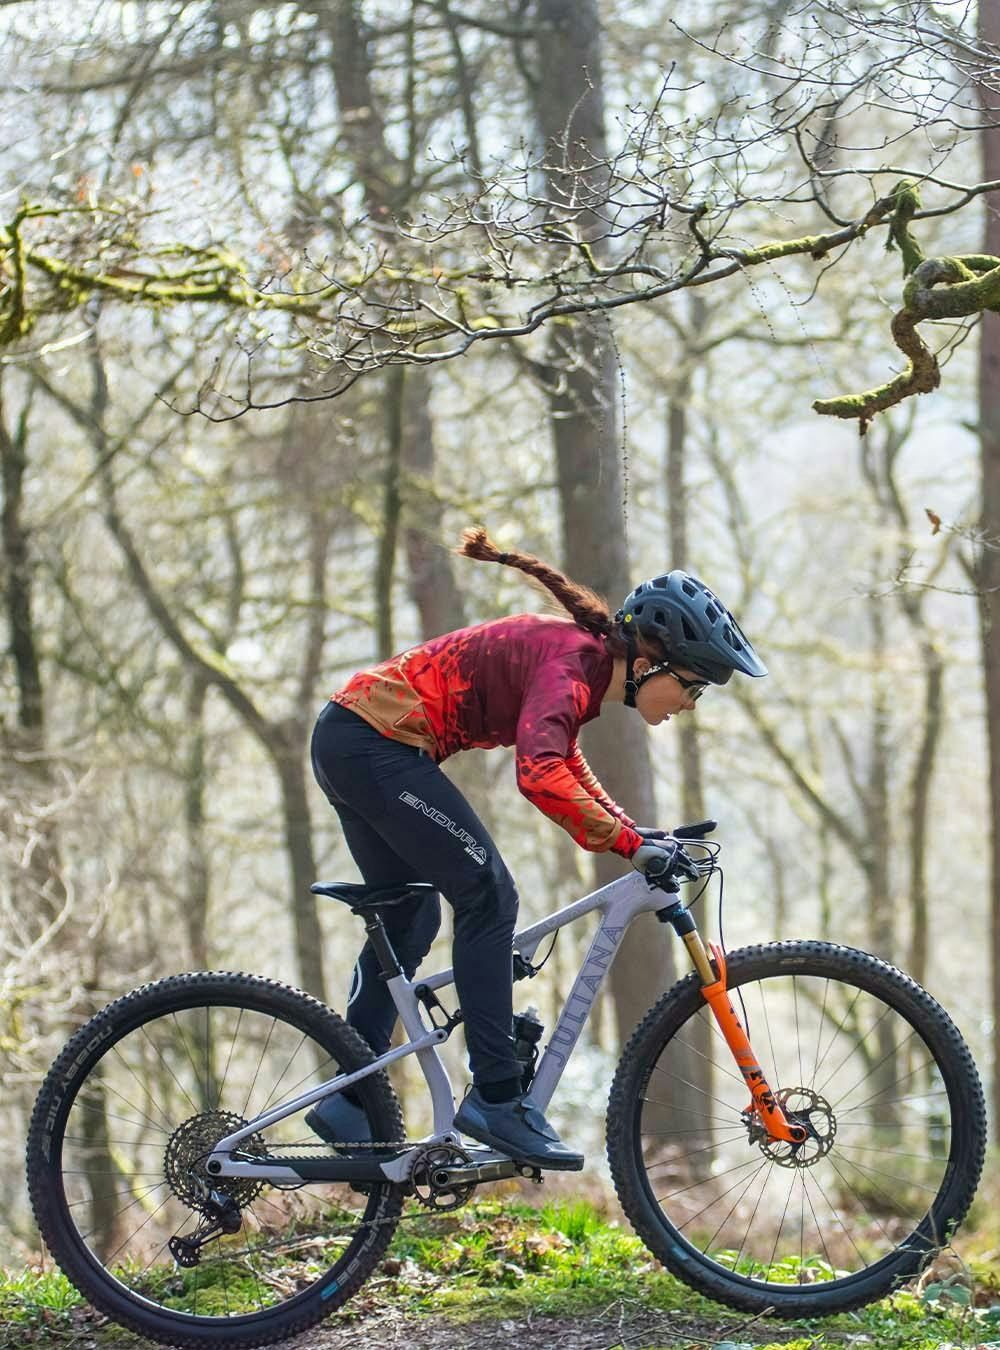 Juliana Bicycles Pro XC Athlete: Isla Short riding on a singletrack trail in the forest